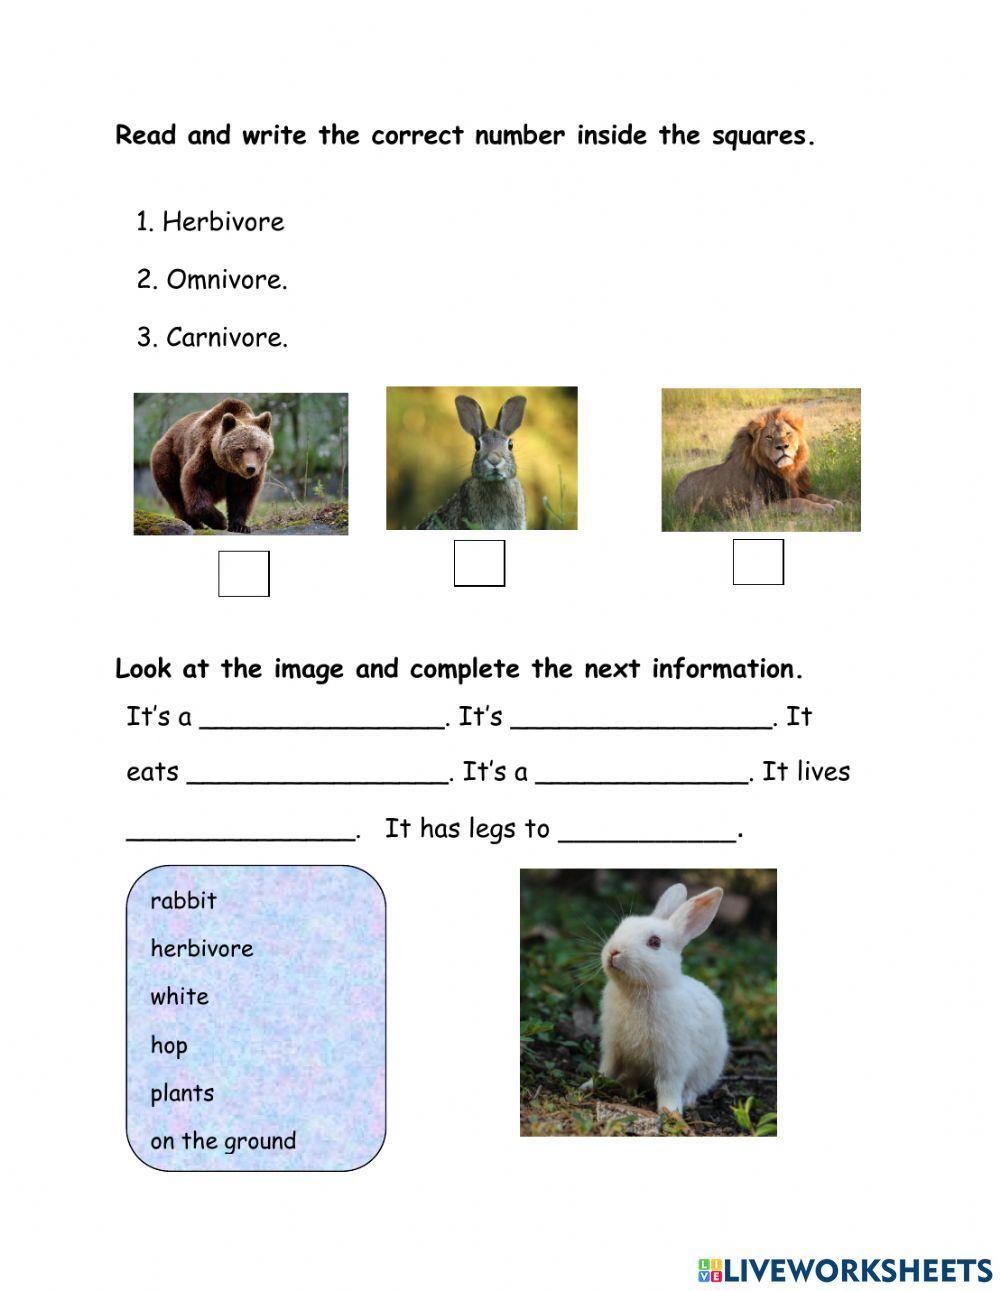 Science test 2